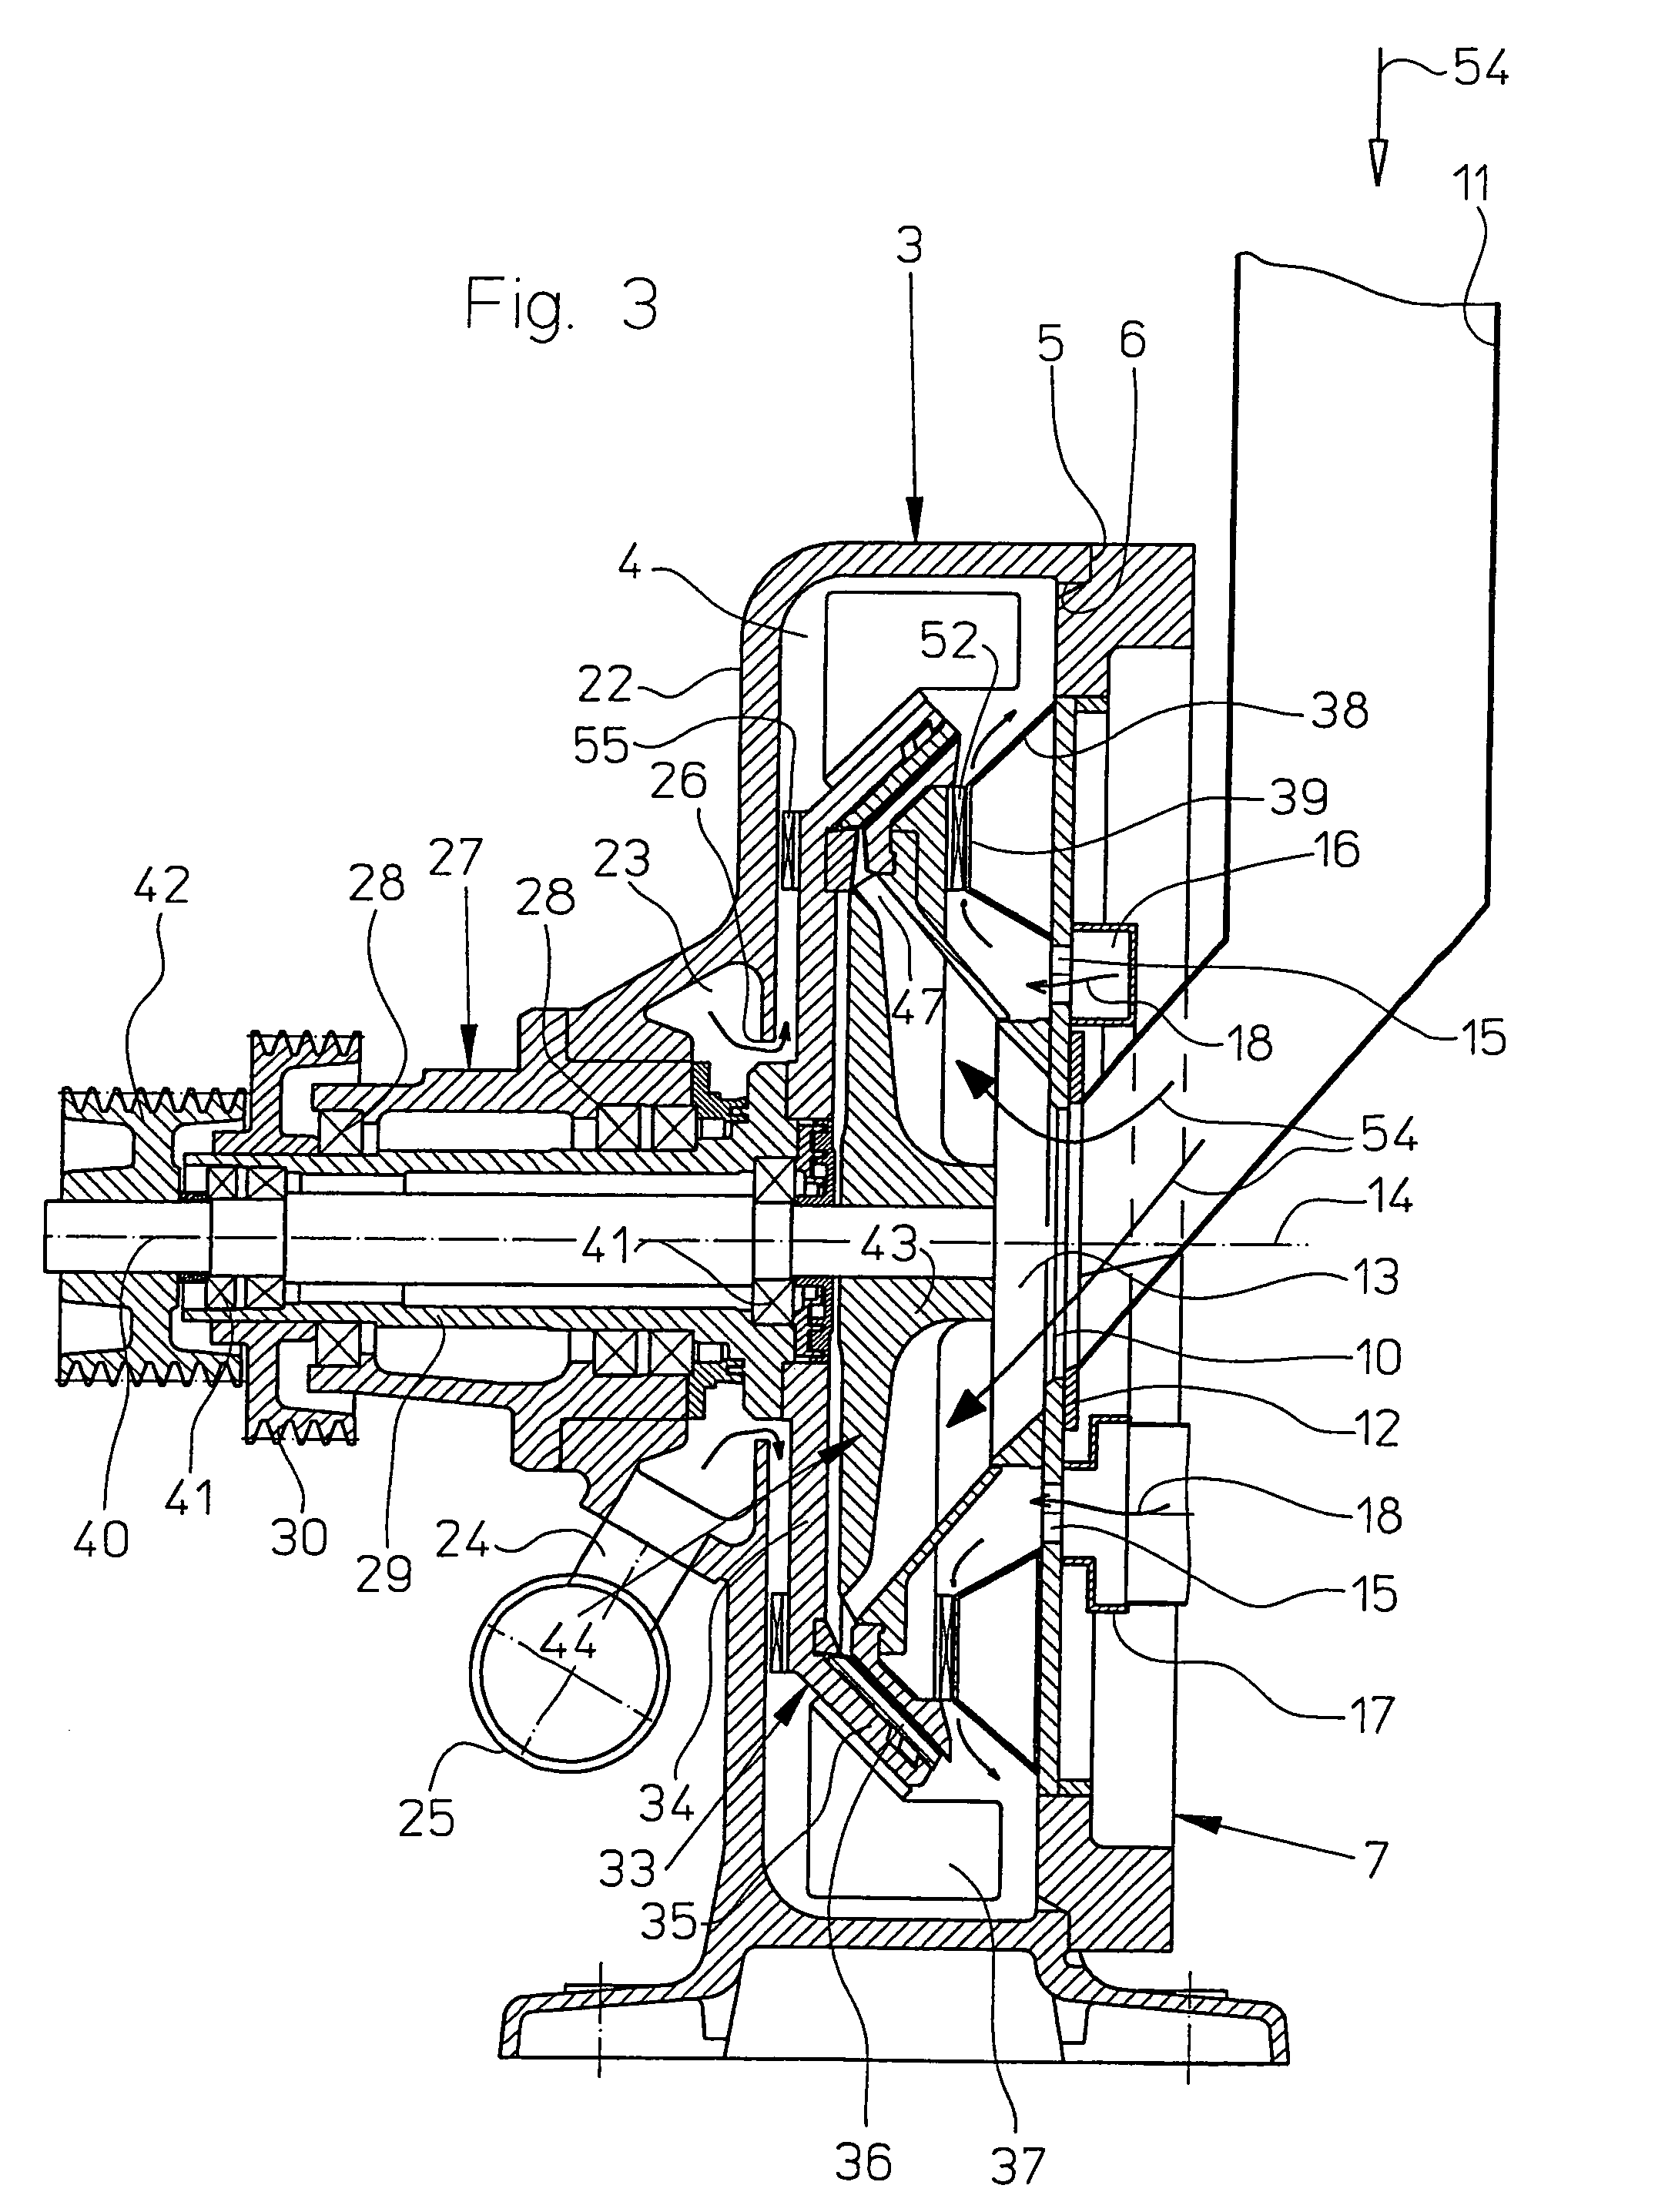 Apparatus for comminuting material having a cool air channel